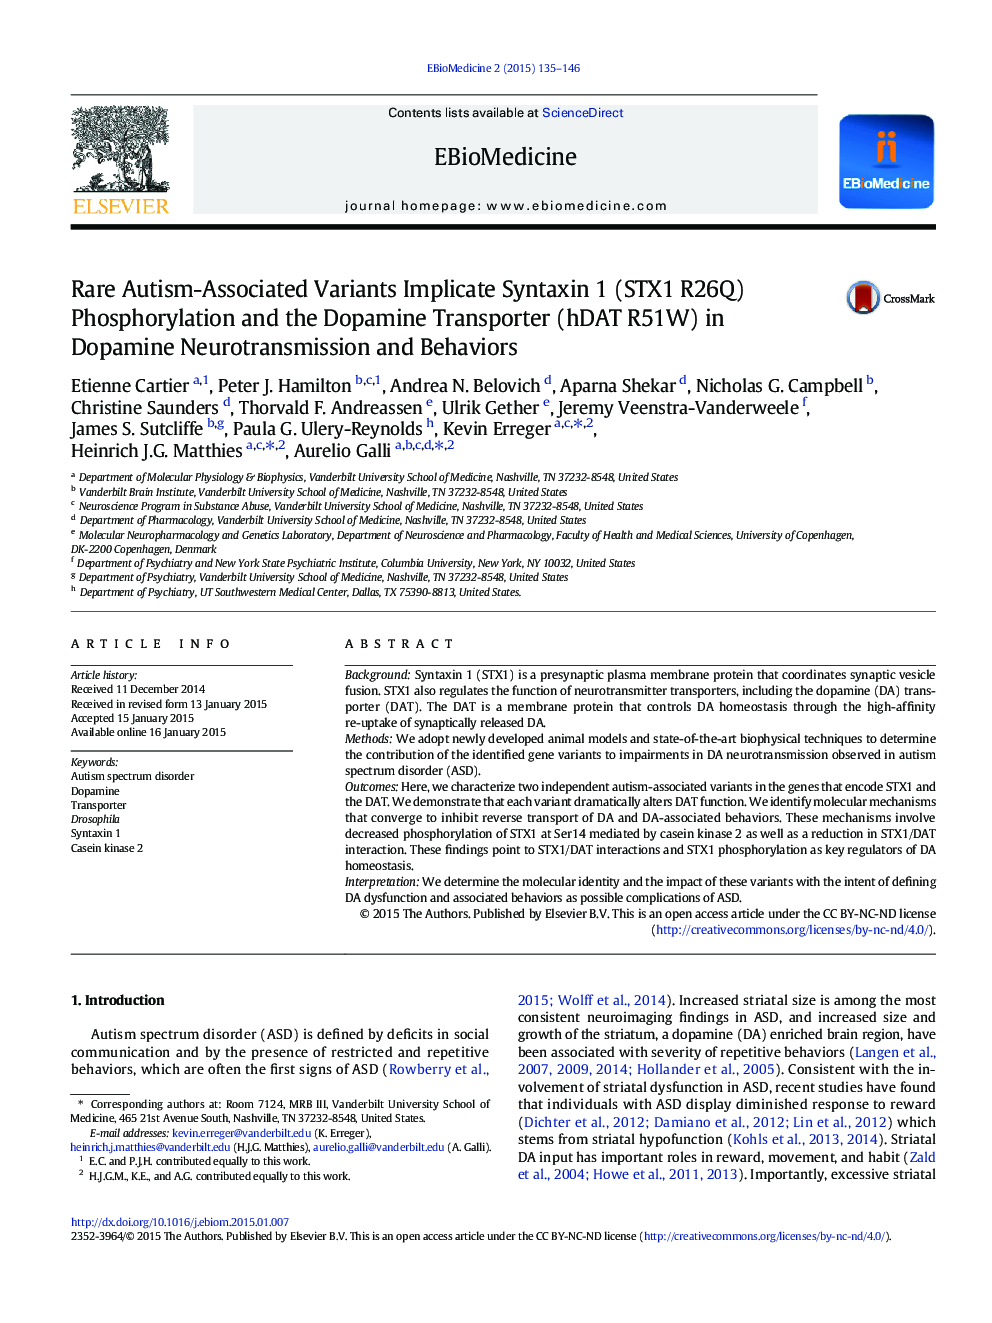 Rare Autism-Associated Variants Implicate Syntaxin 1 (STX1 R26Q) Phosphorylation and the Dopamine Transporter (hDAT R51W) in Dopamine Neurotransmission and Behaviors